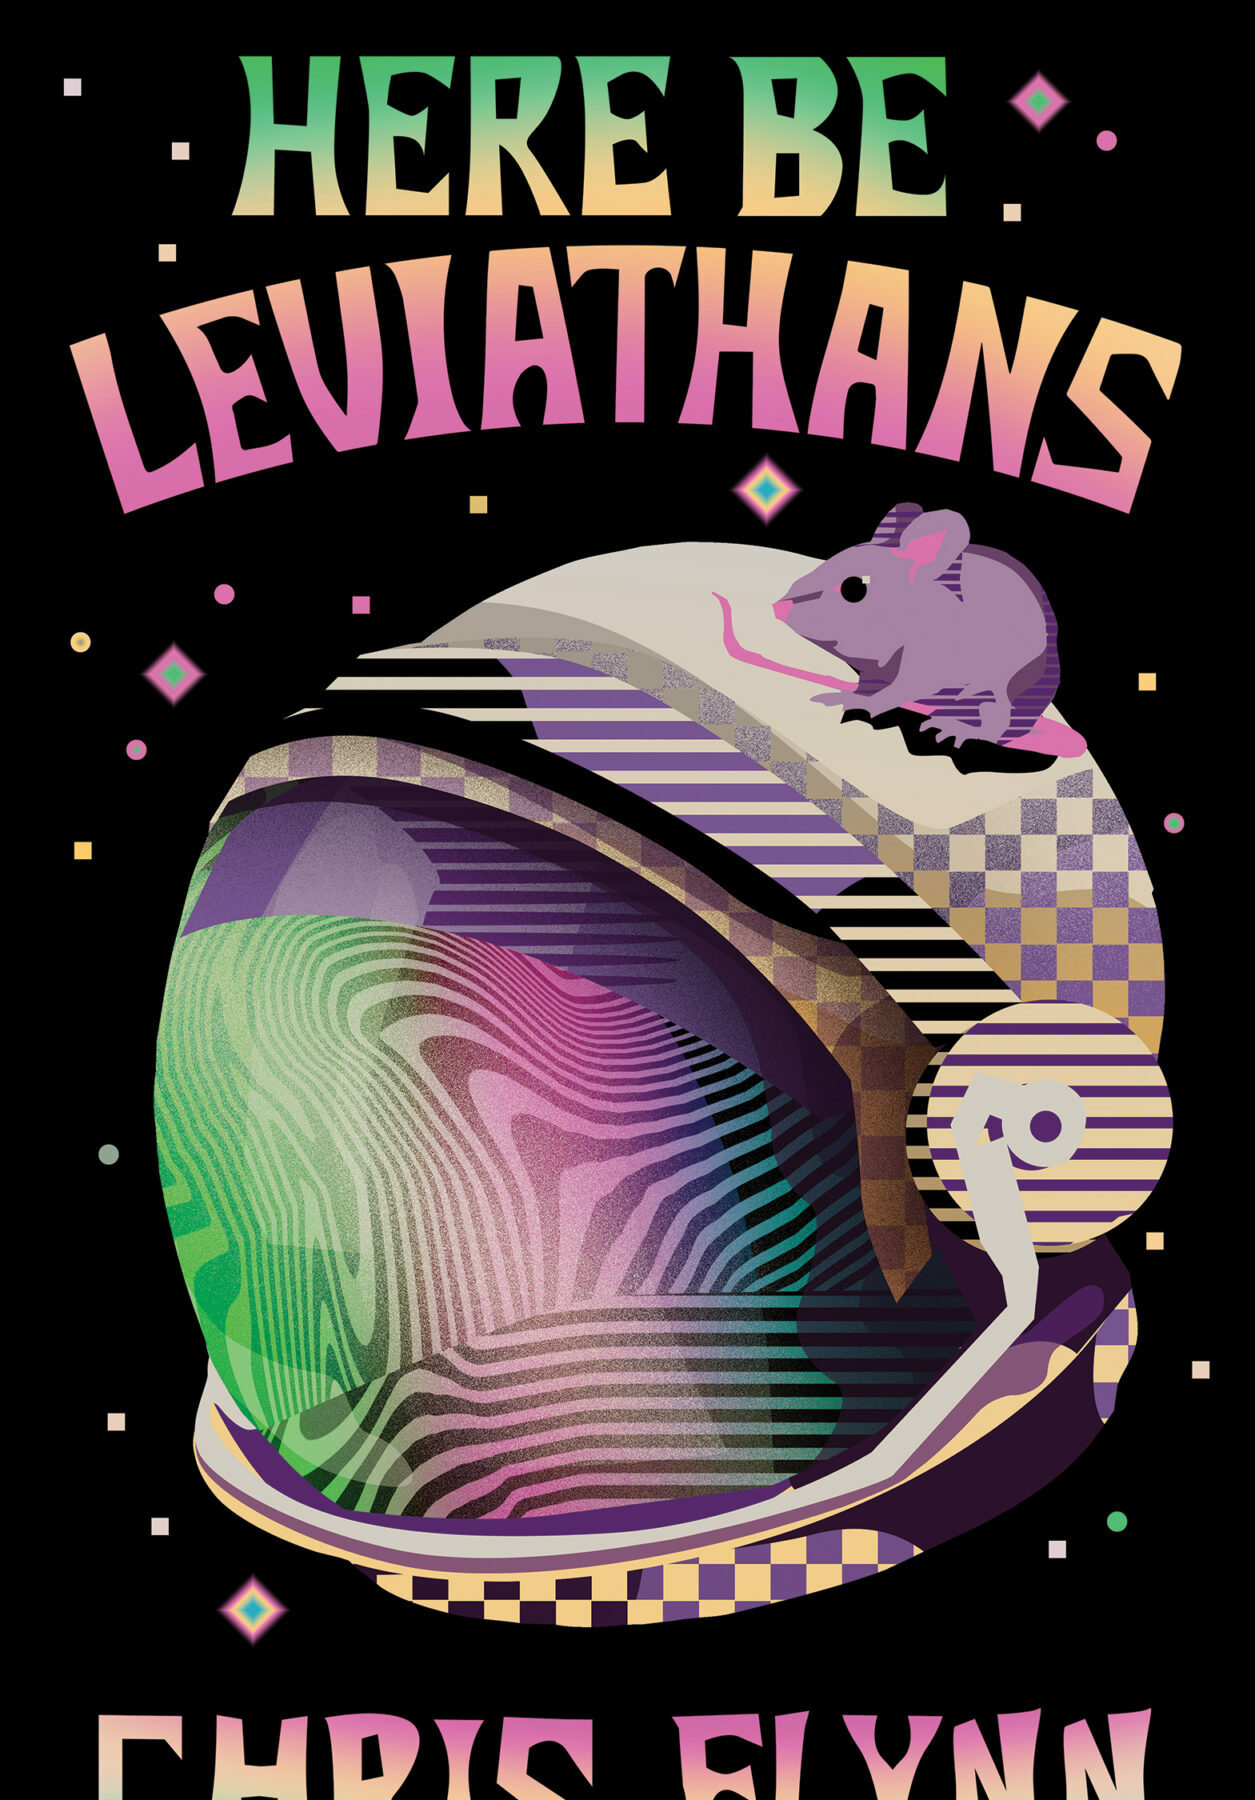 A black book cover with a colourful illustration of a space helmet with a mouse on it